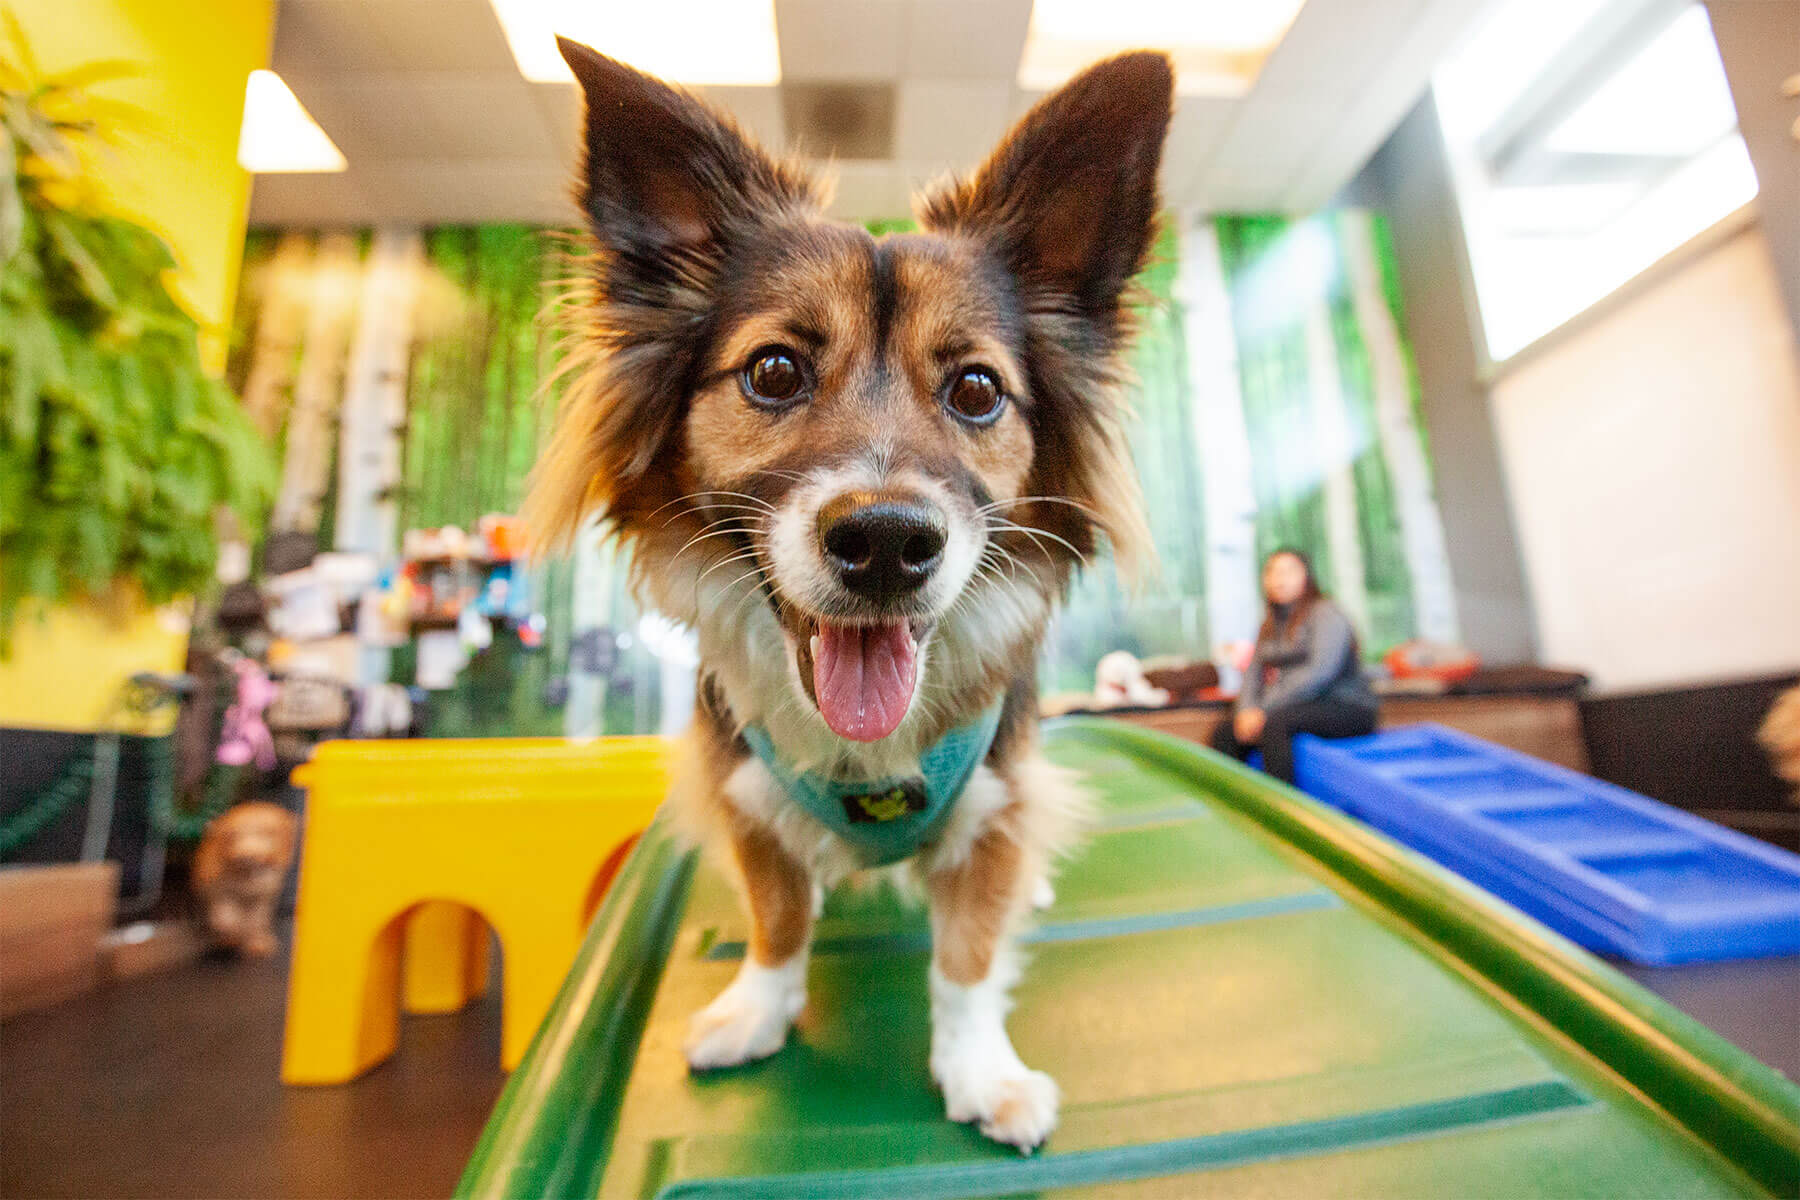 Dog featured playing at doggy daycare for business brand photos
